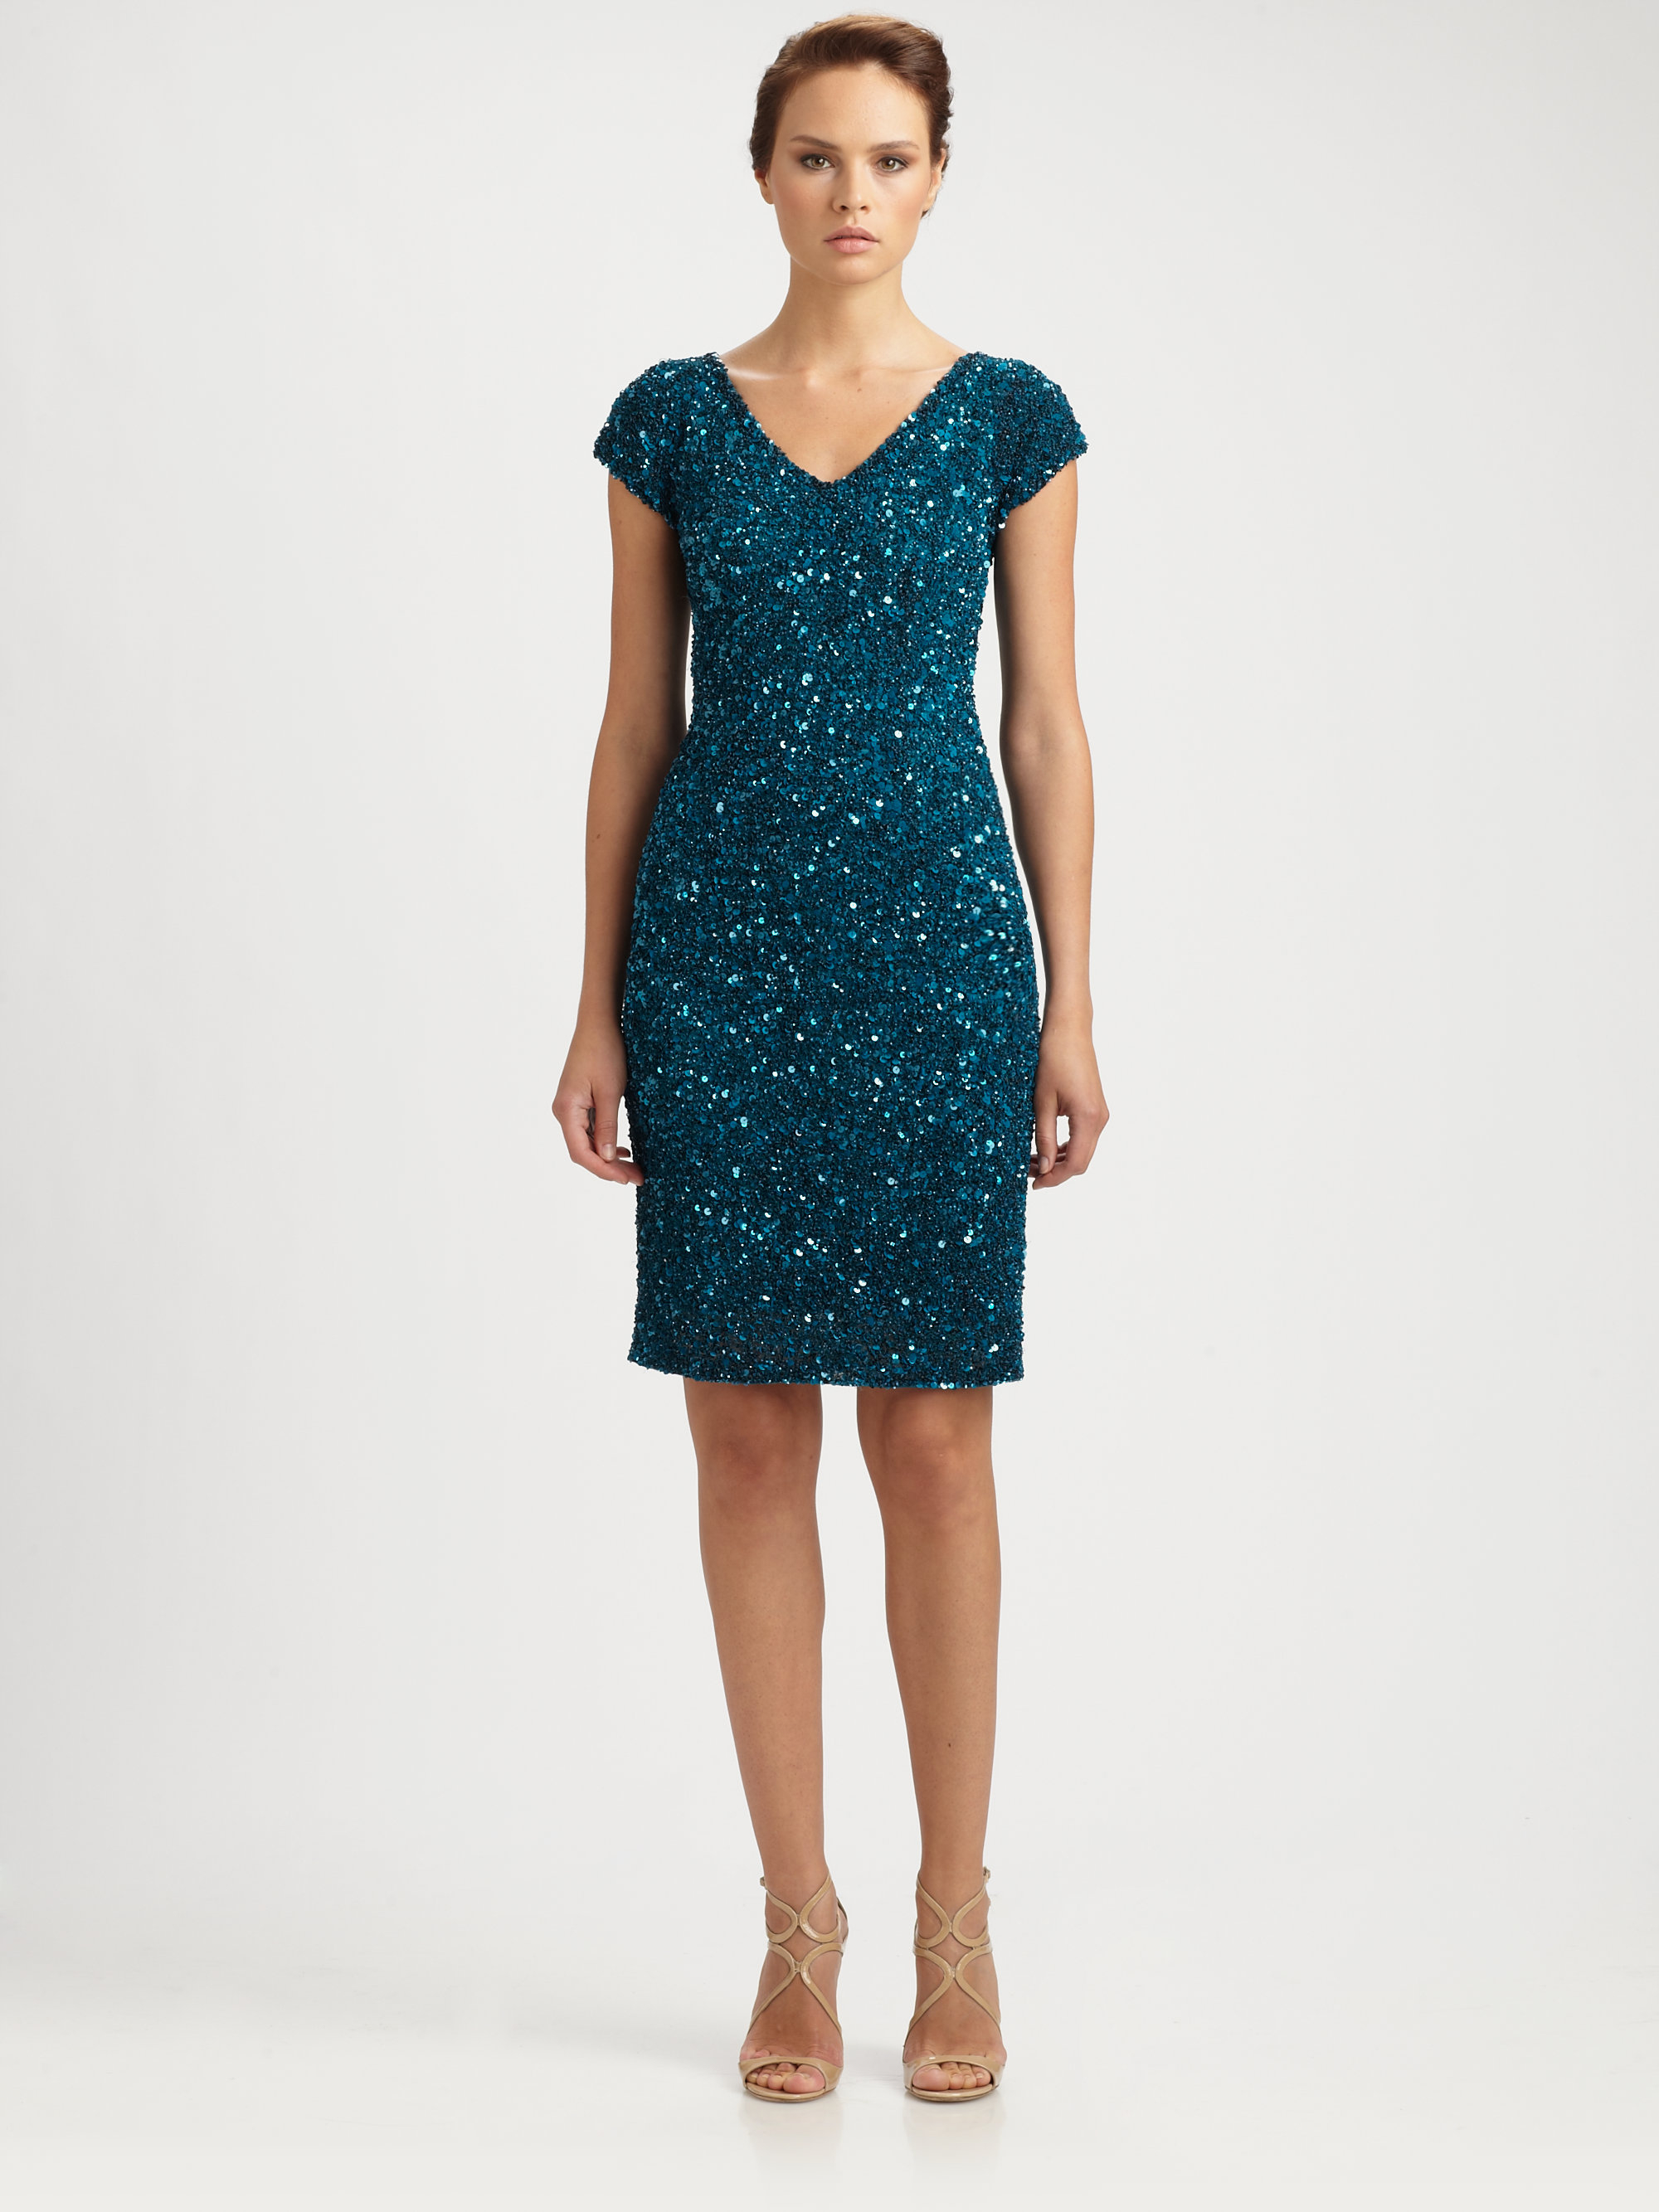 Lyst - Theia Beaded Cocktail Dress in Green